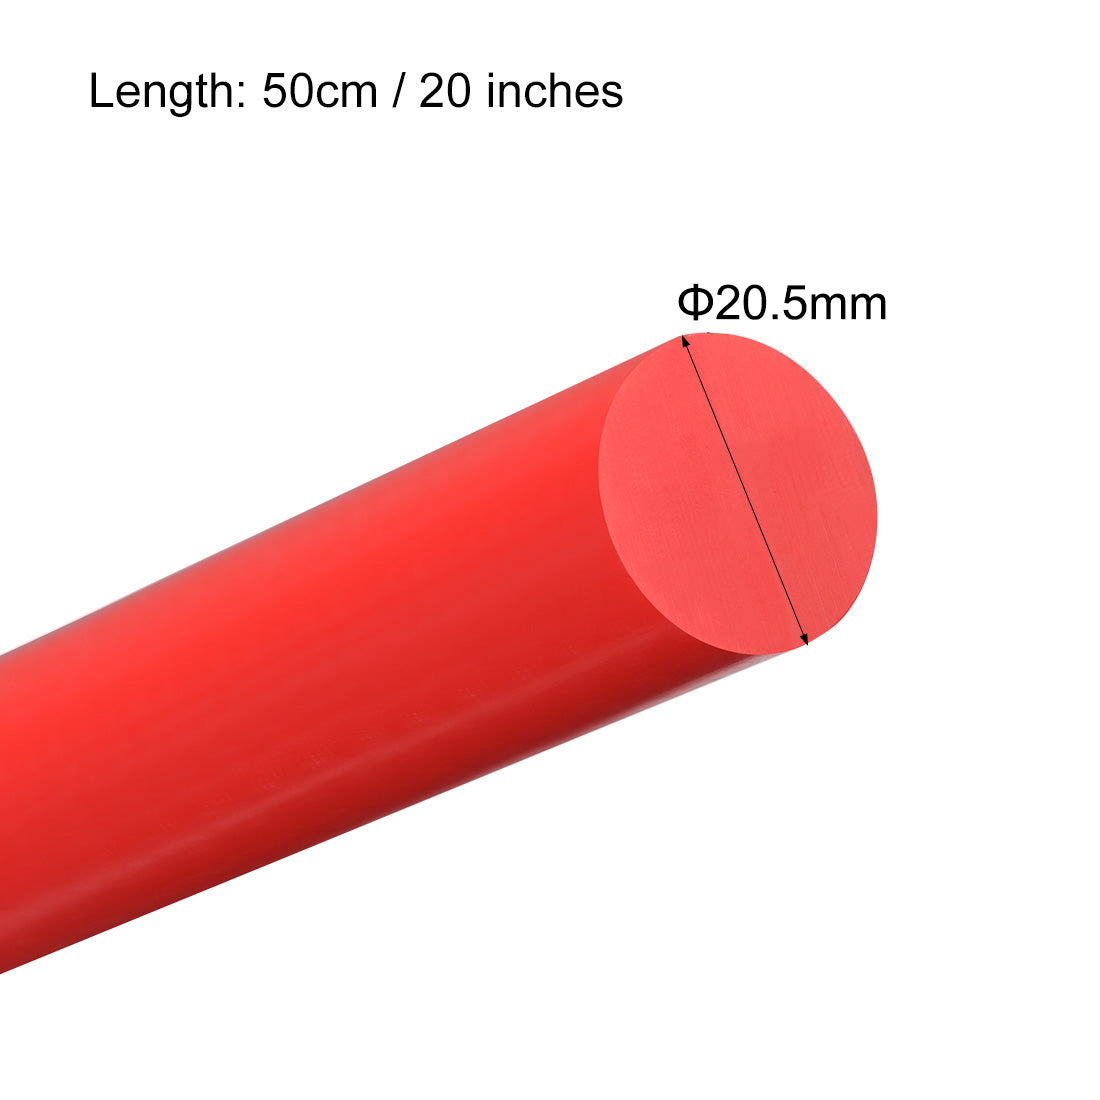 uxcell Uxcell Plastic Round Rod,20.5mm Dia 50cm Red Engineering Plastic Round Bar 2pcs